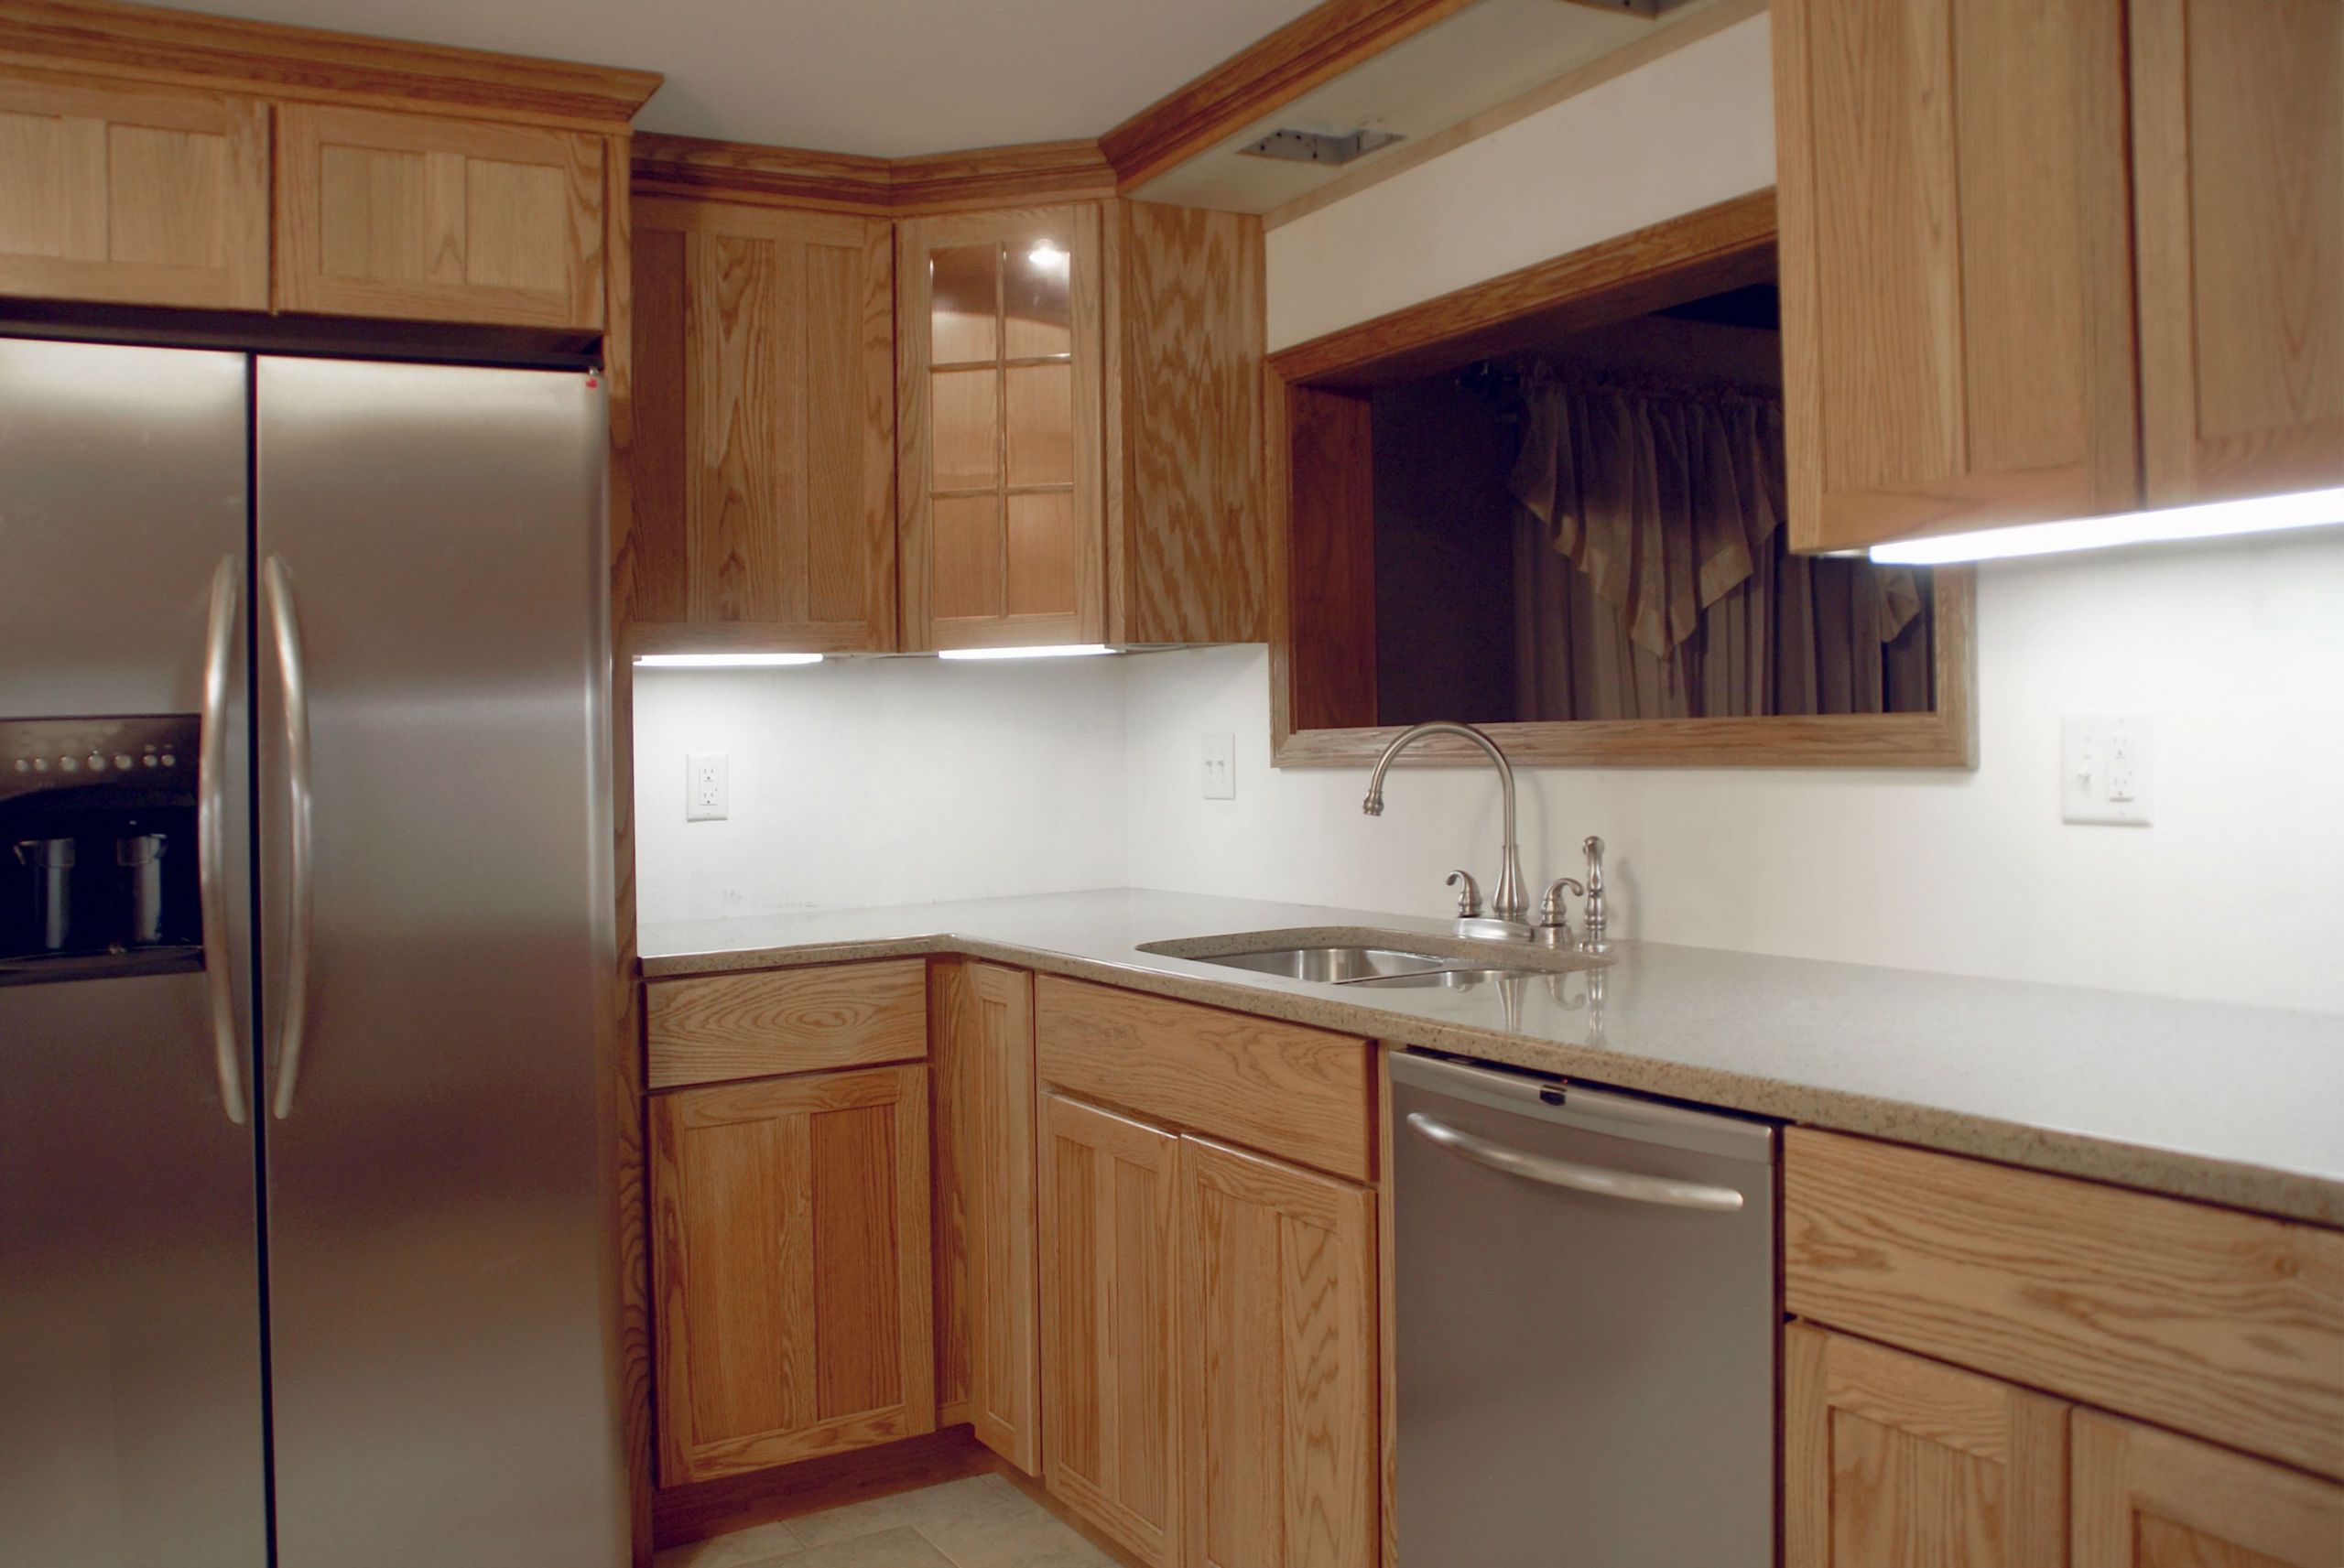 Kitchen Cabinet Walls
 Refacing or Replacing Kitchen Cabinets